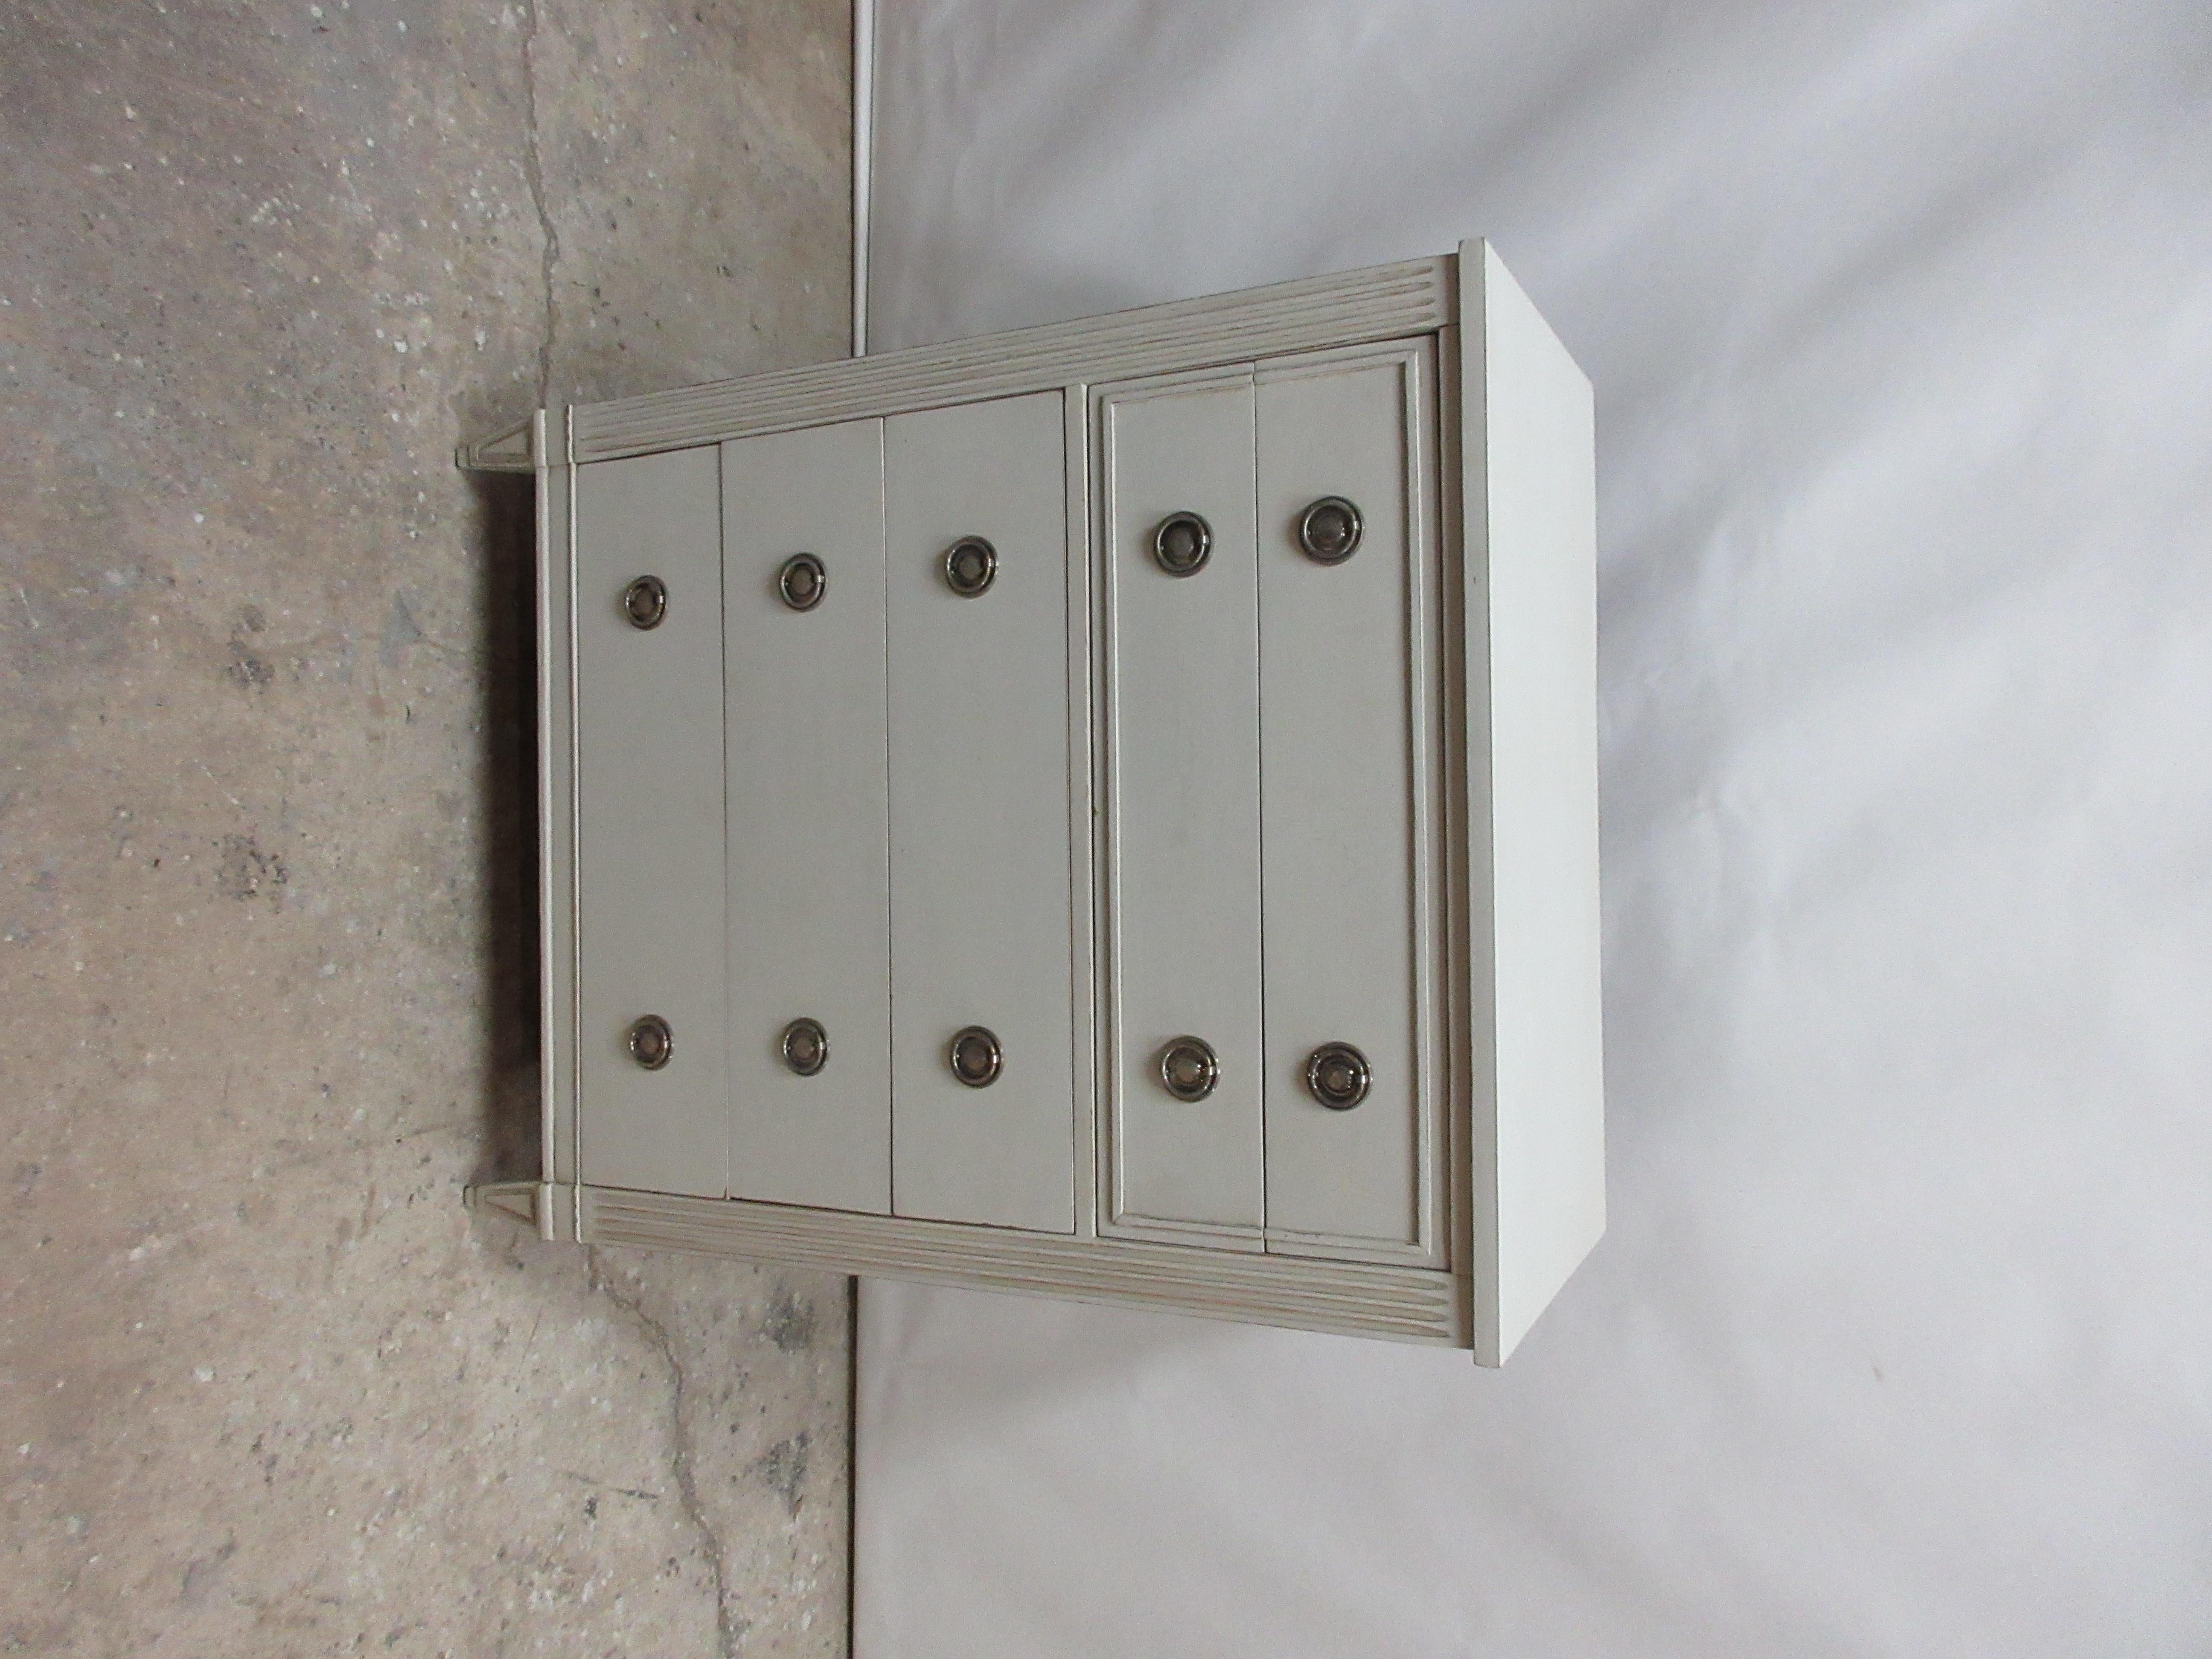 This is a Gustavian 5 drawer chest of drawers, it’s been restored and repainted with Milk Paints 